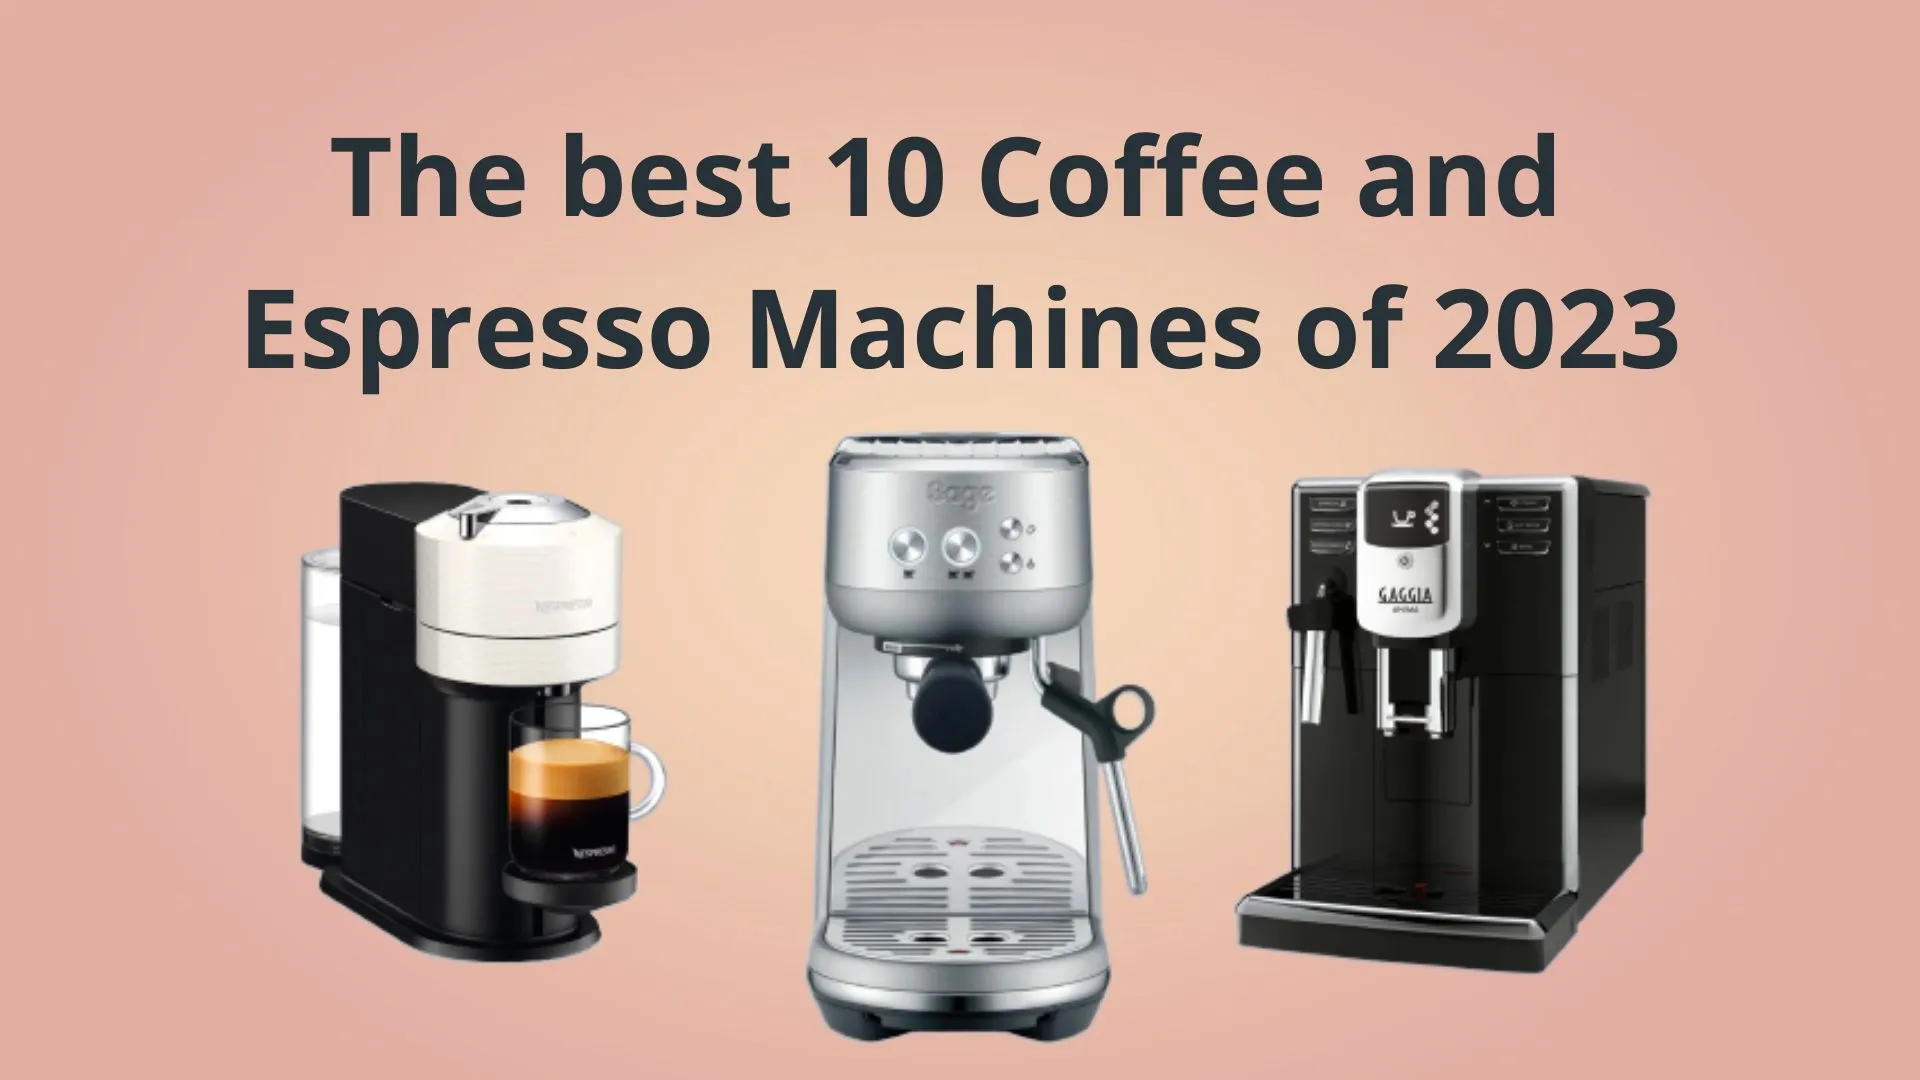 The best 10 Coffee and Espresso Machines of 2023 – Tested and Reviewed